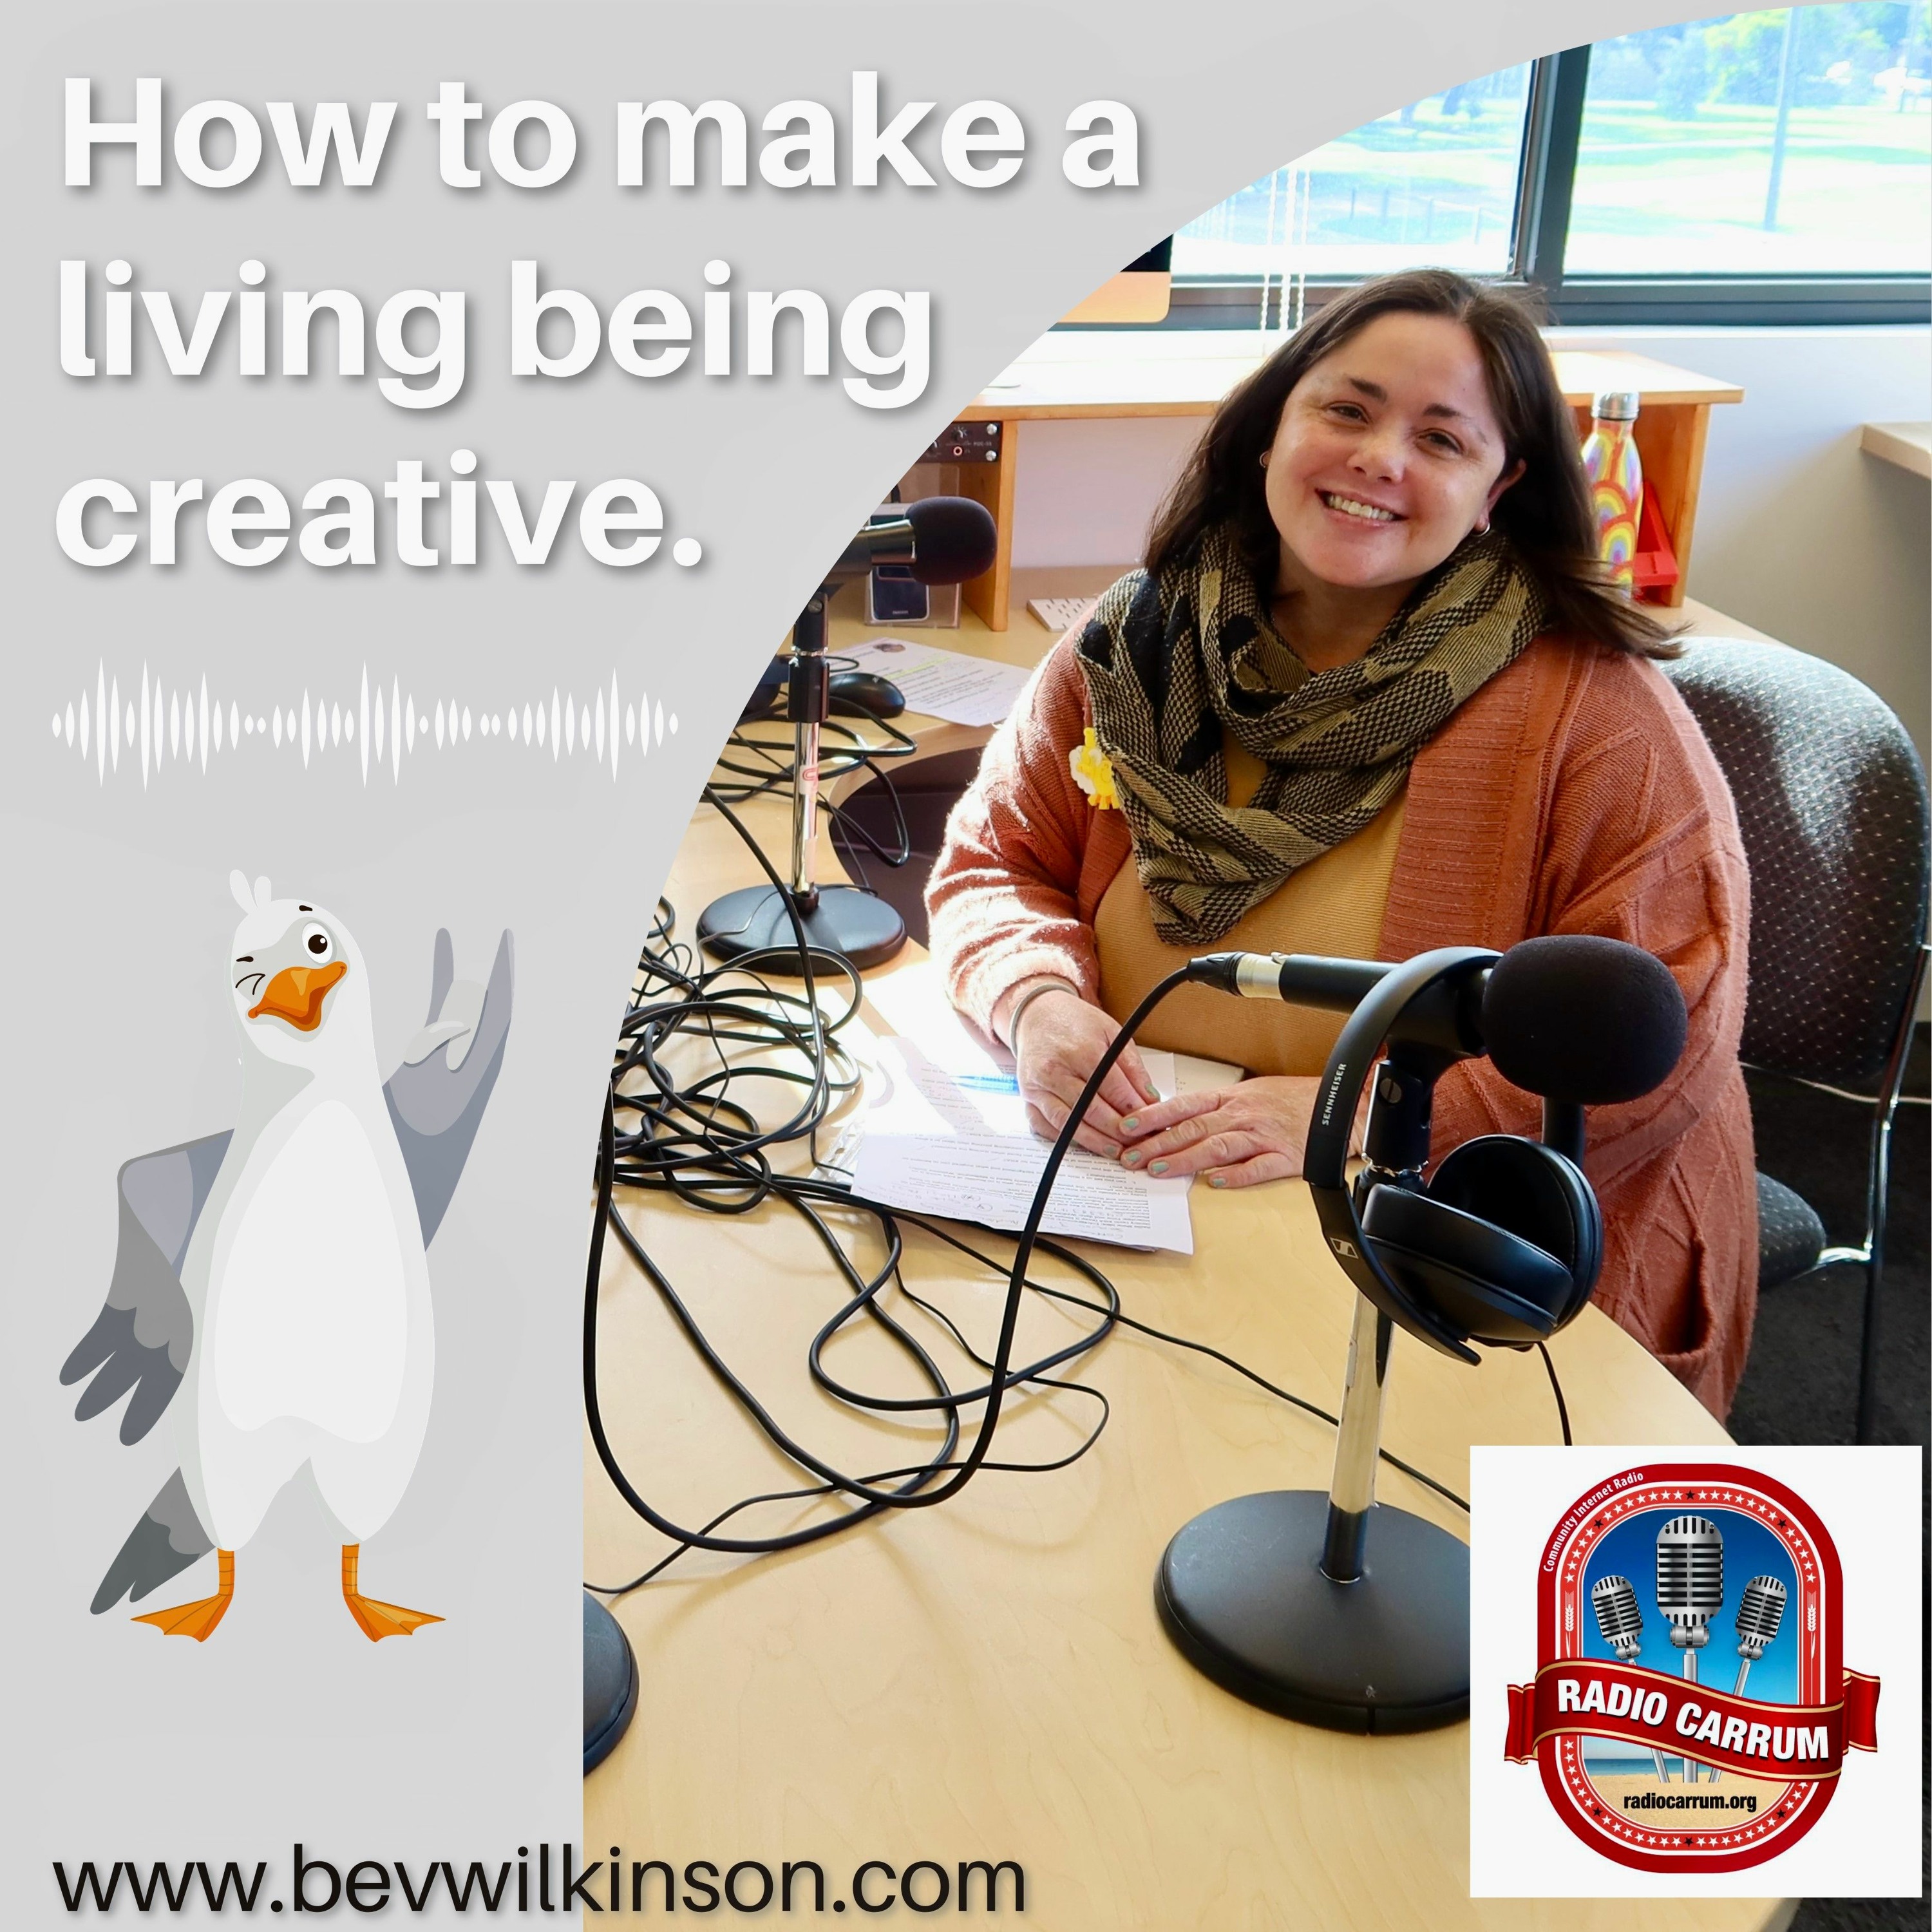 How To Make A Living Being Creative - Episode 1